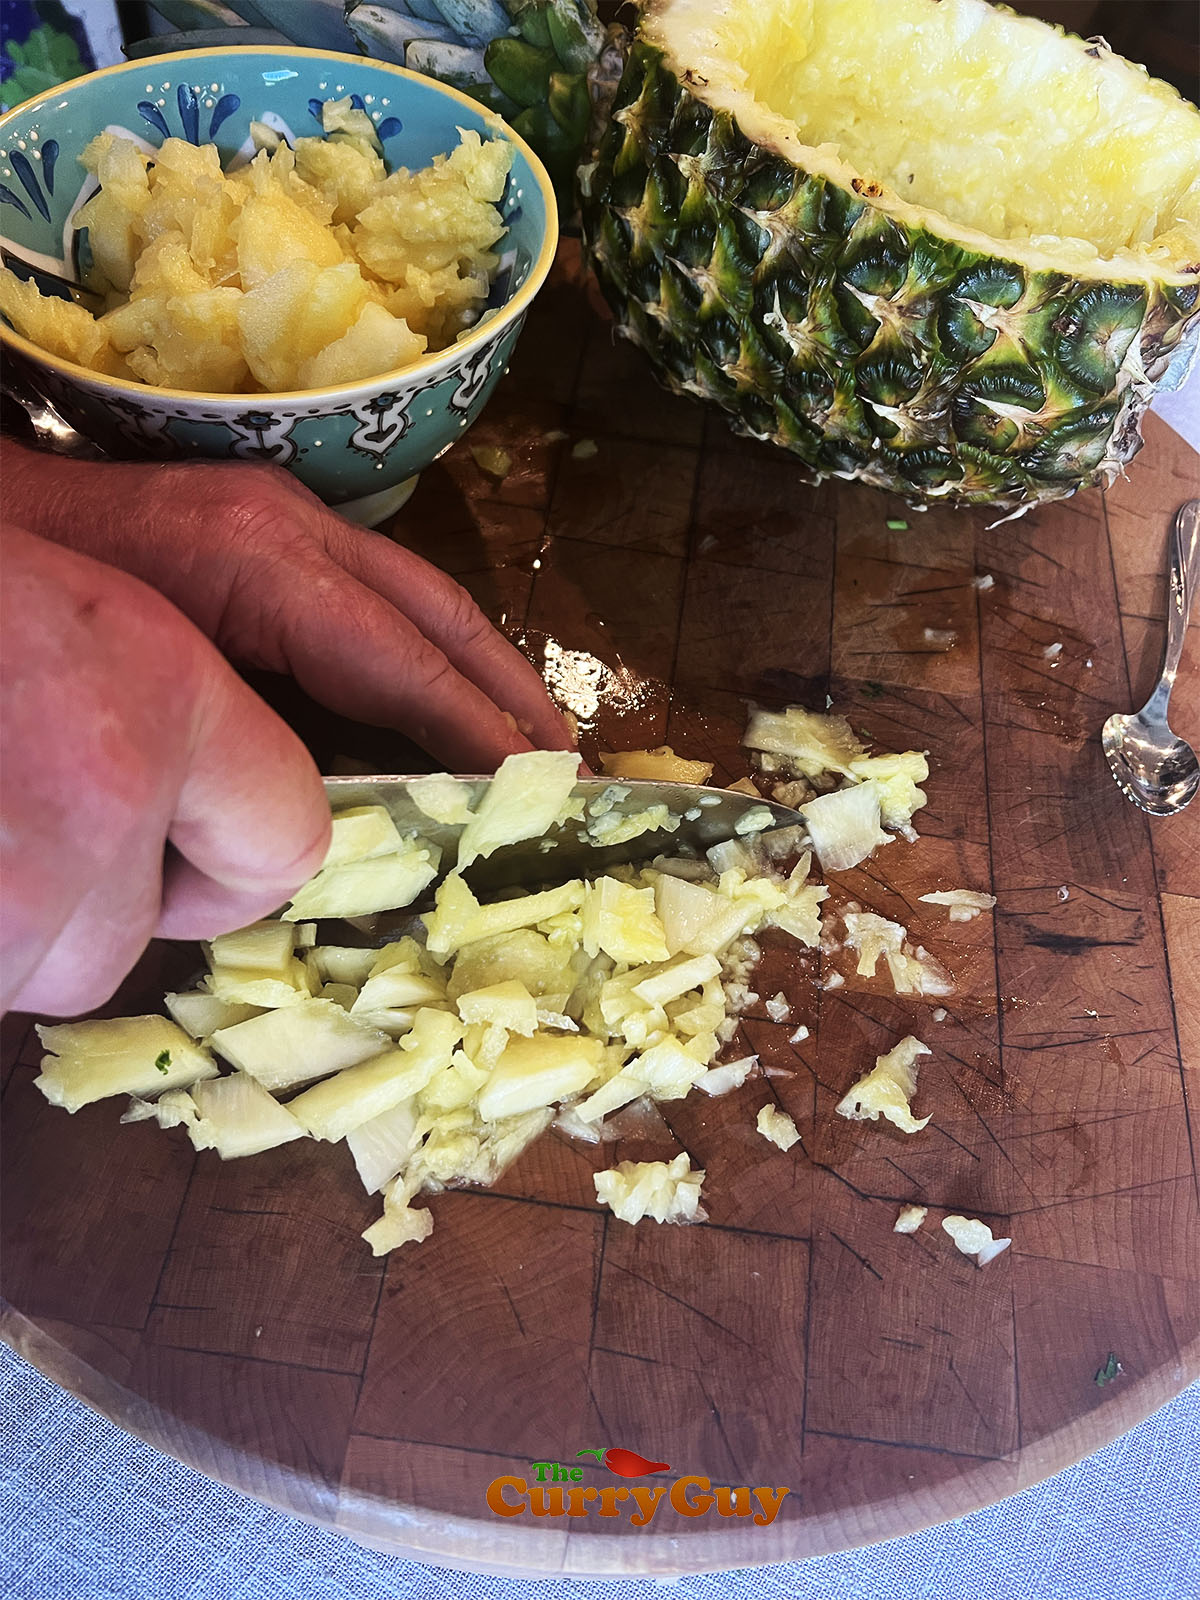 Slicing pineapple into small dice for the salsa.